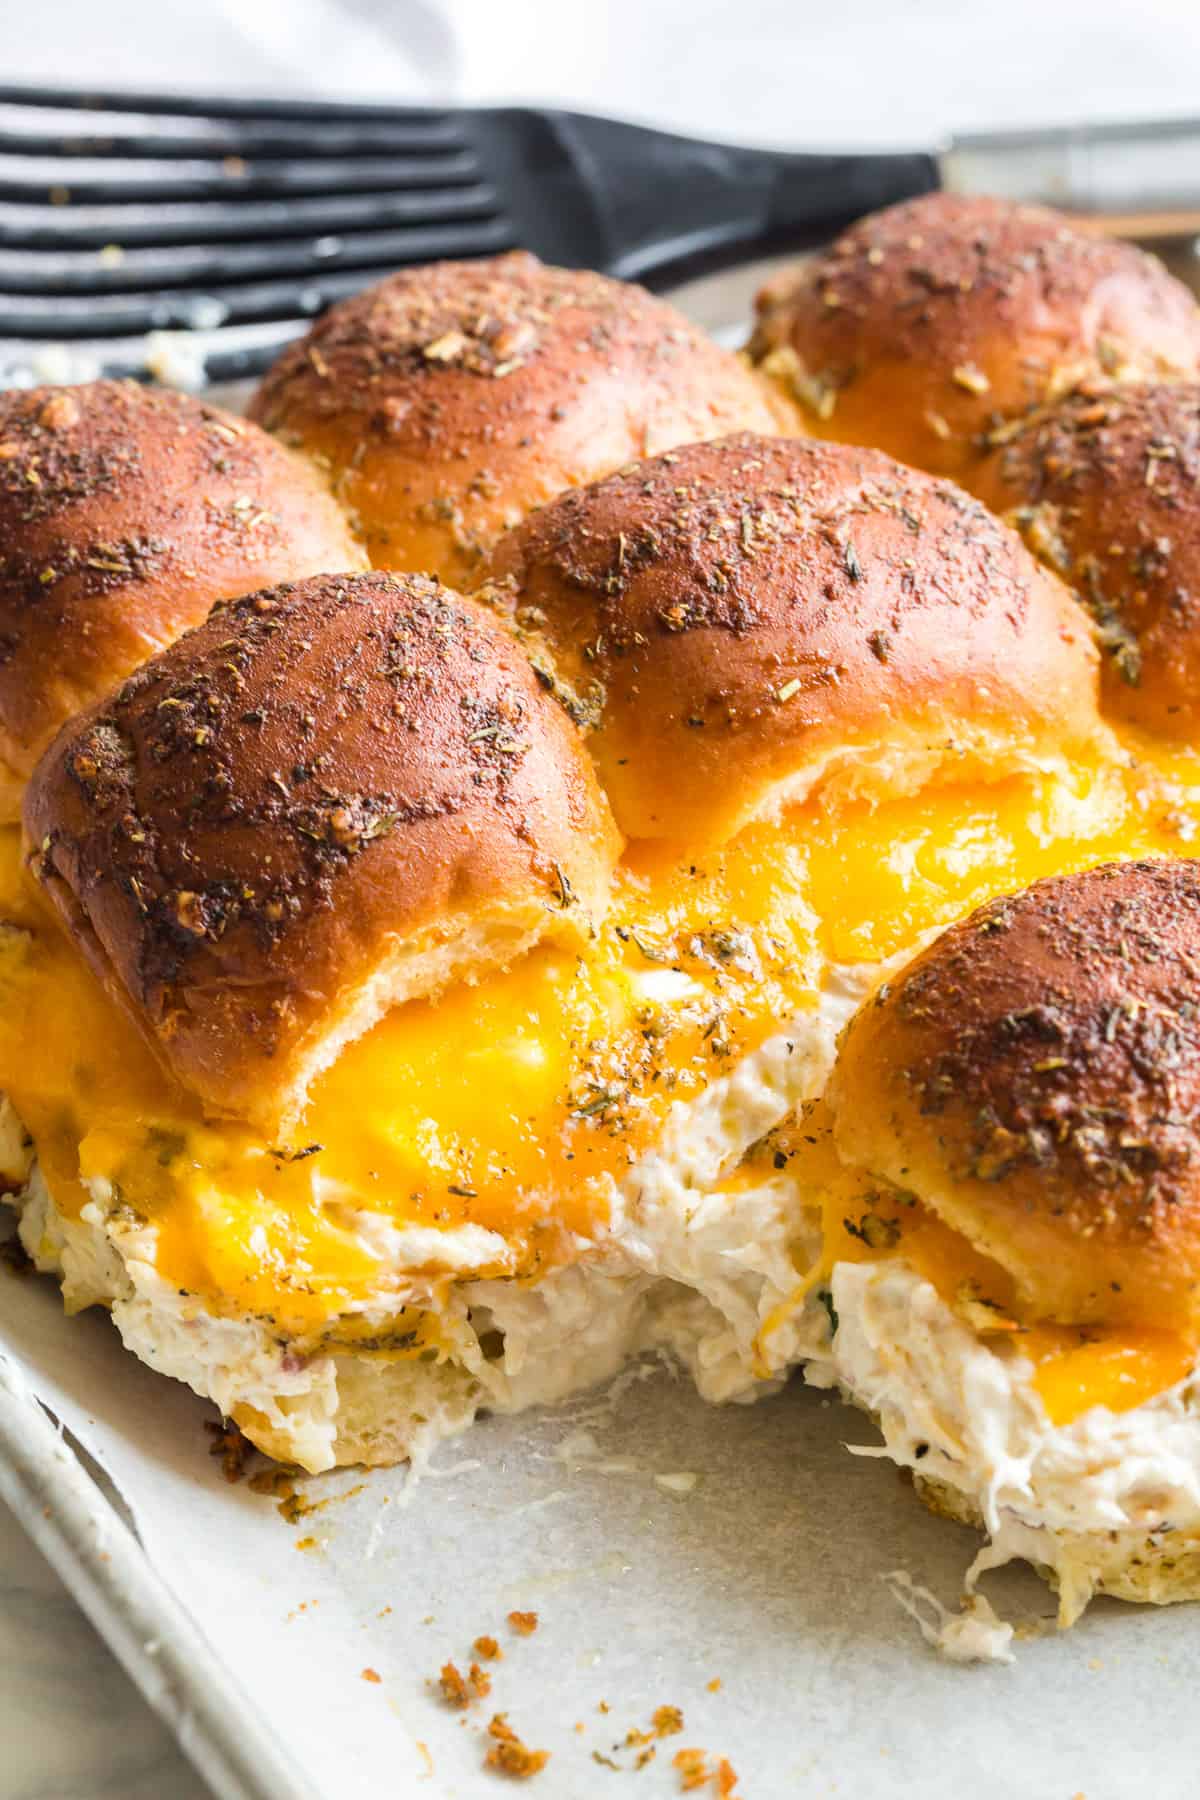 pull apart sandwiches with melted cheddar cheese and a butter herb topping